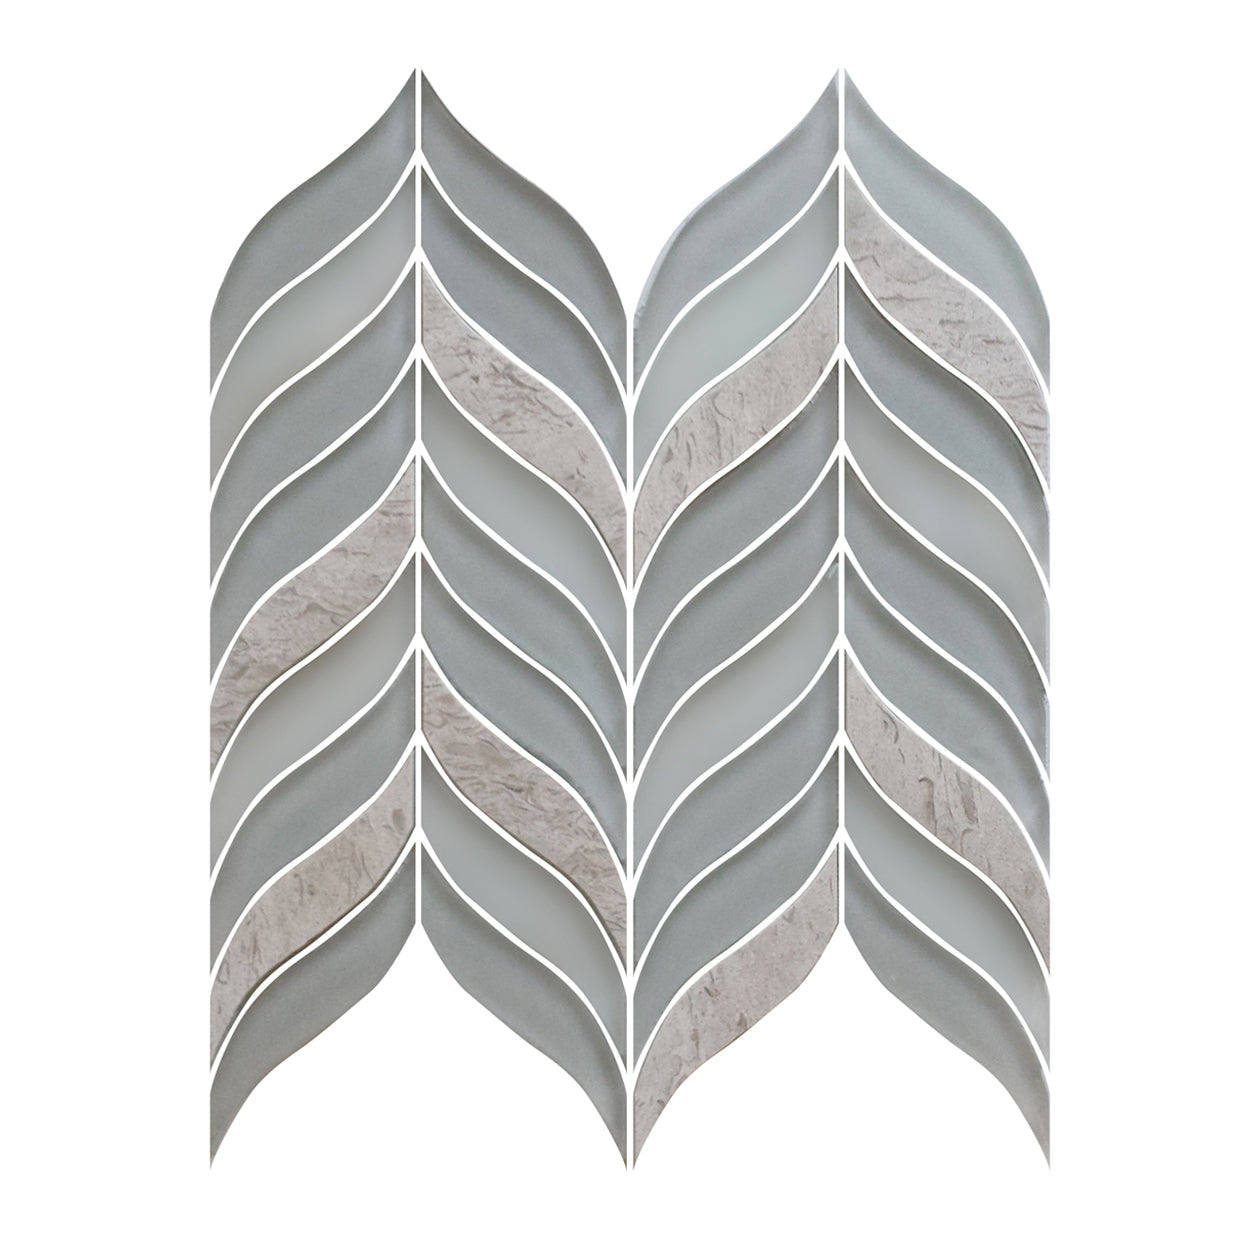 Lungarno Natural Elements Leaf 11.75" x 12" Stone & Glass Mosaic